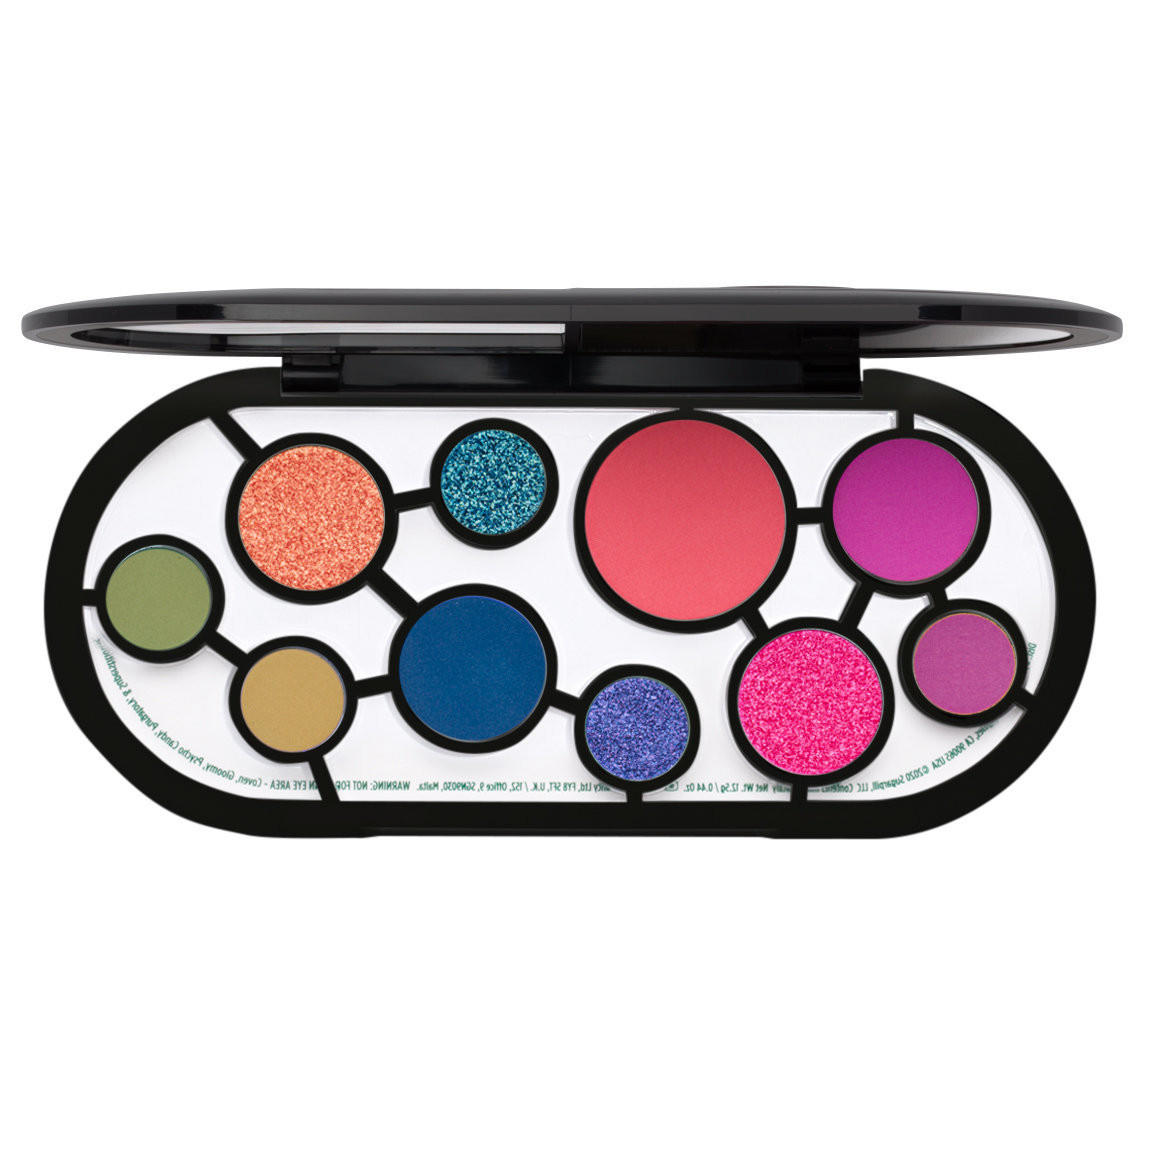 Sugarpill Capsule Collection Eyeshadow Palette Black Edition